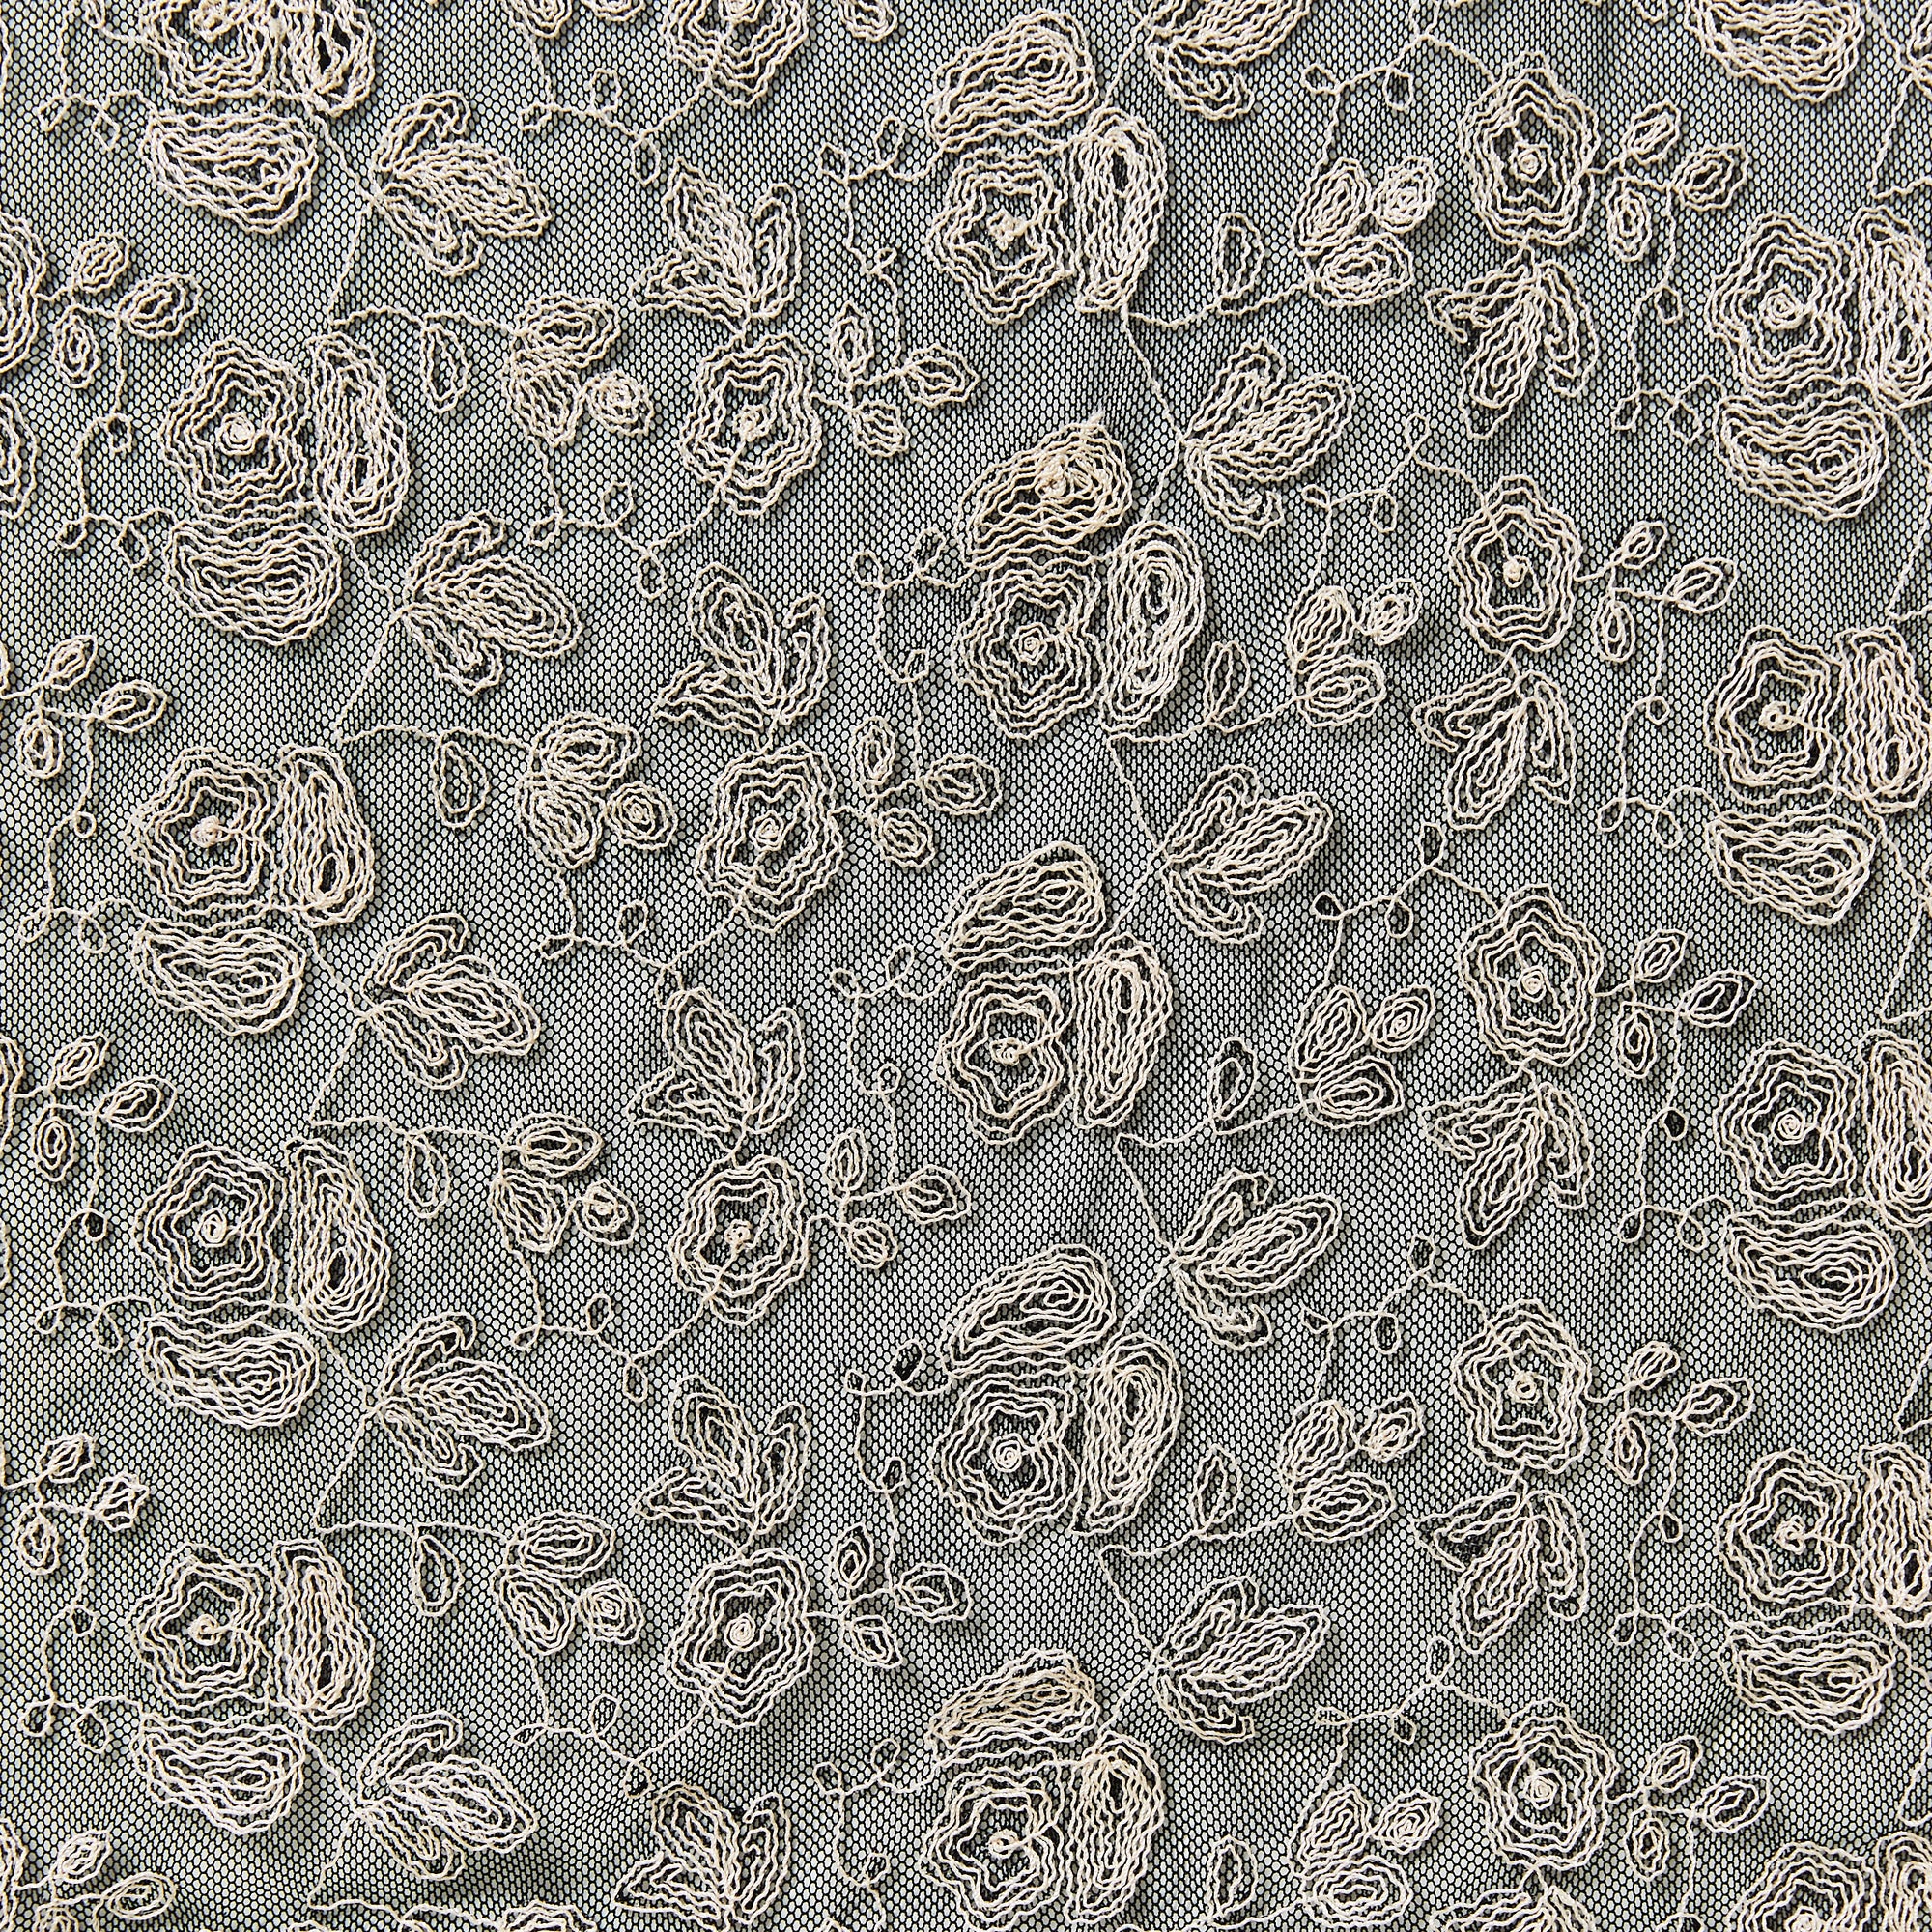 claudia displaying an ivory color version of a rayon Floral Roses design embroidered on a black nylon mesh